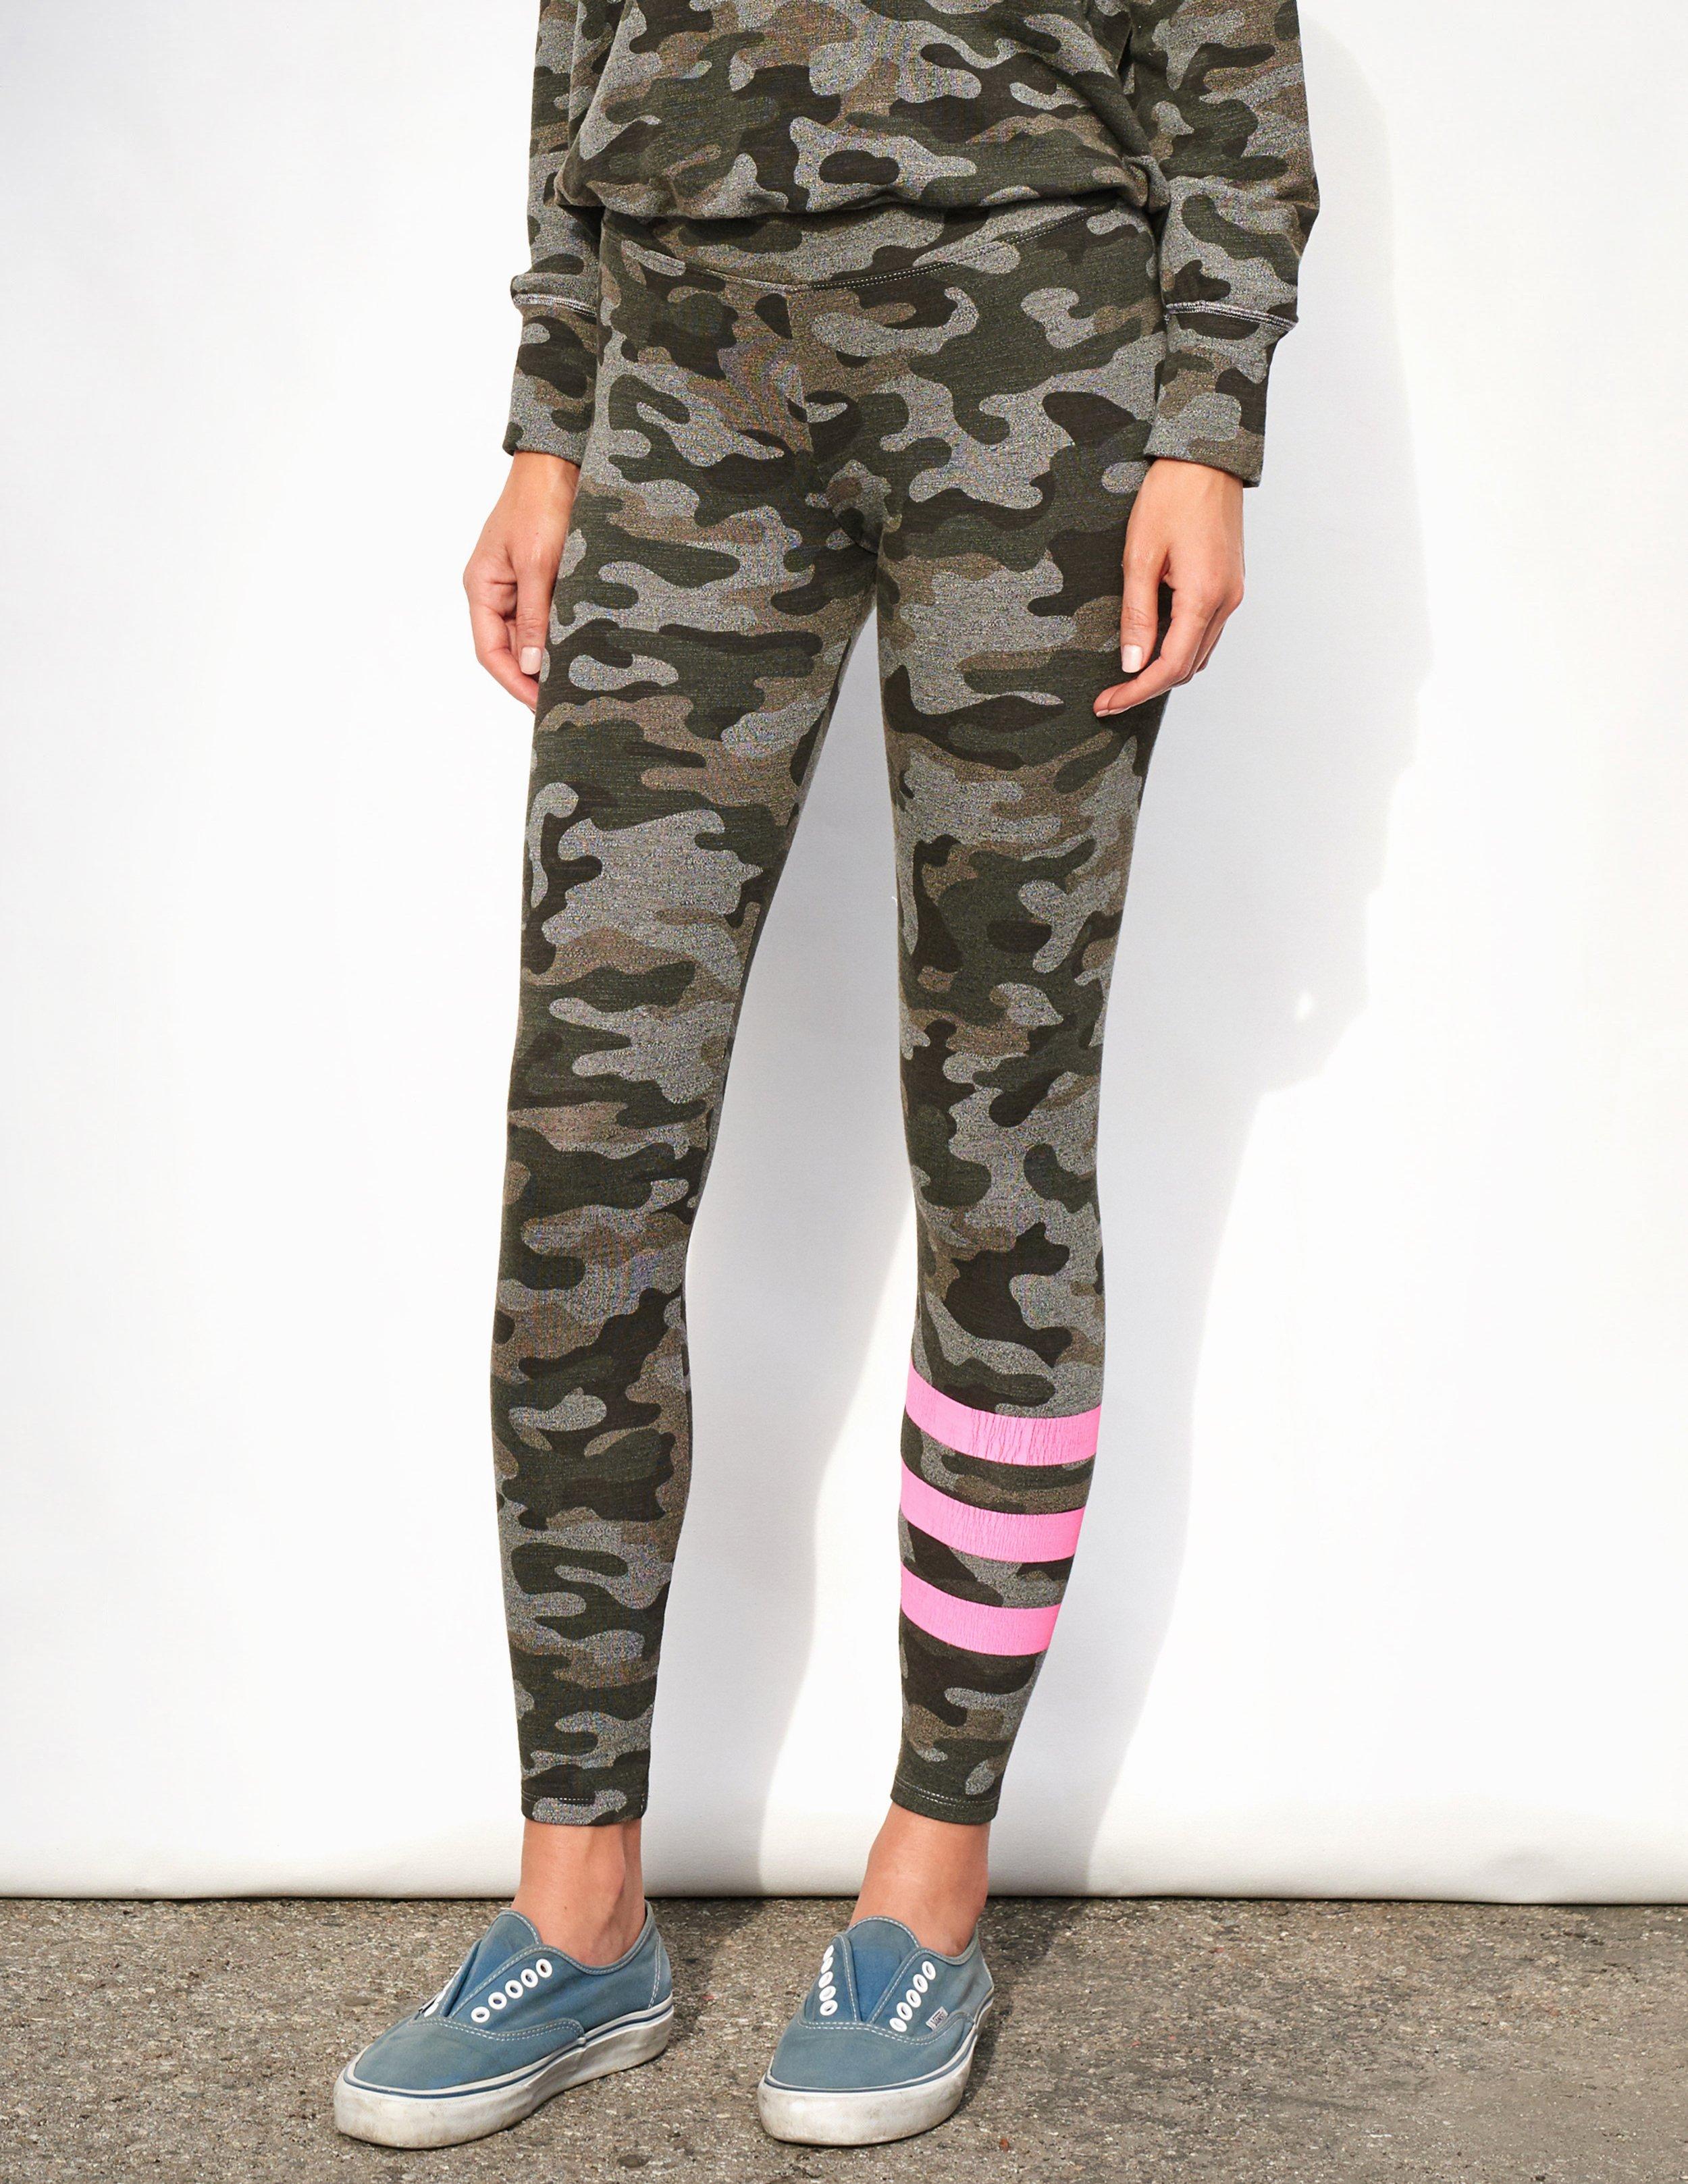 Sundry Synthetic Stripes Camo Yoga Pants in Green - Lyst